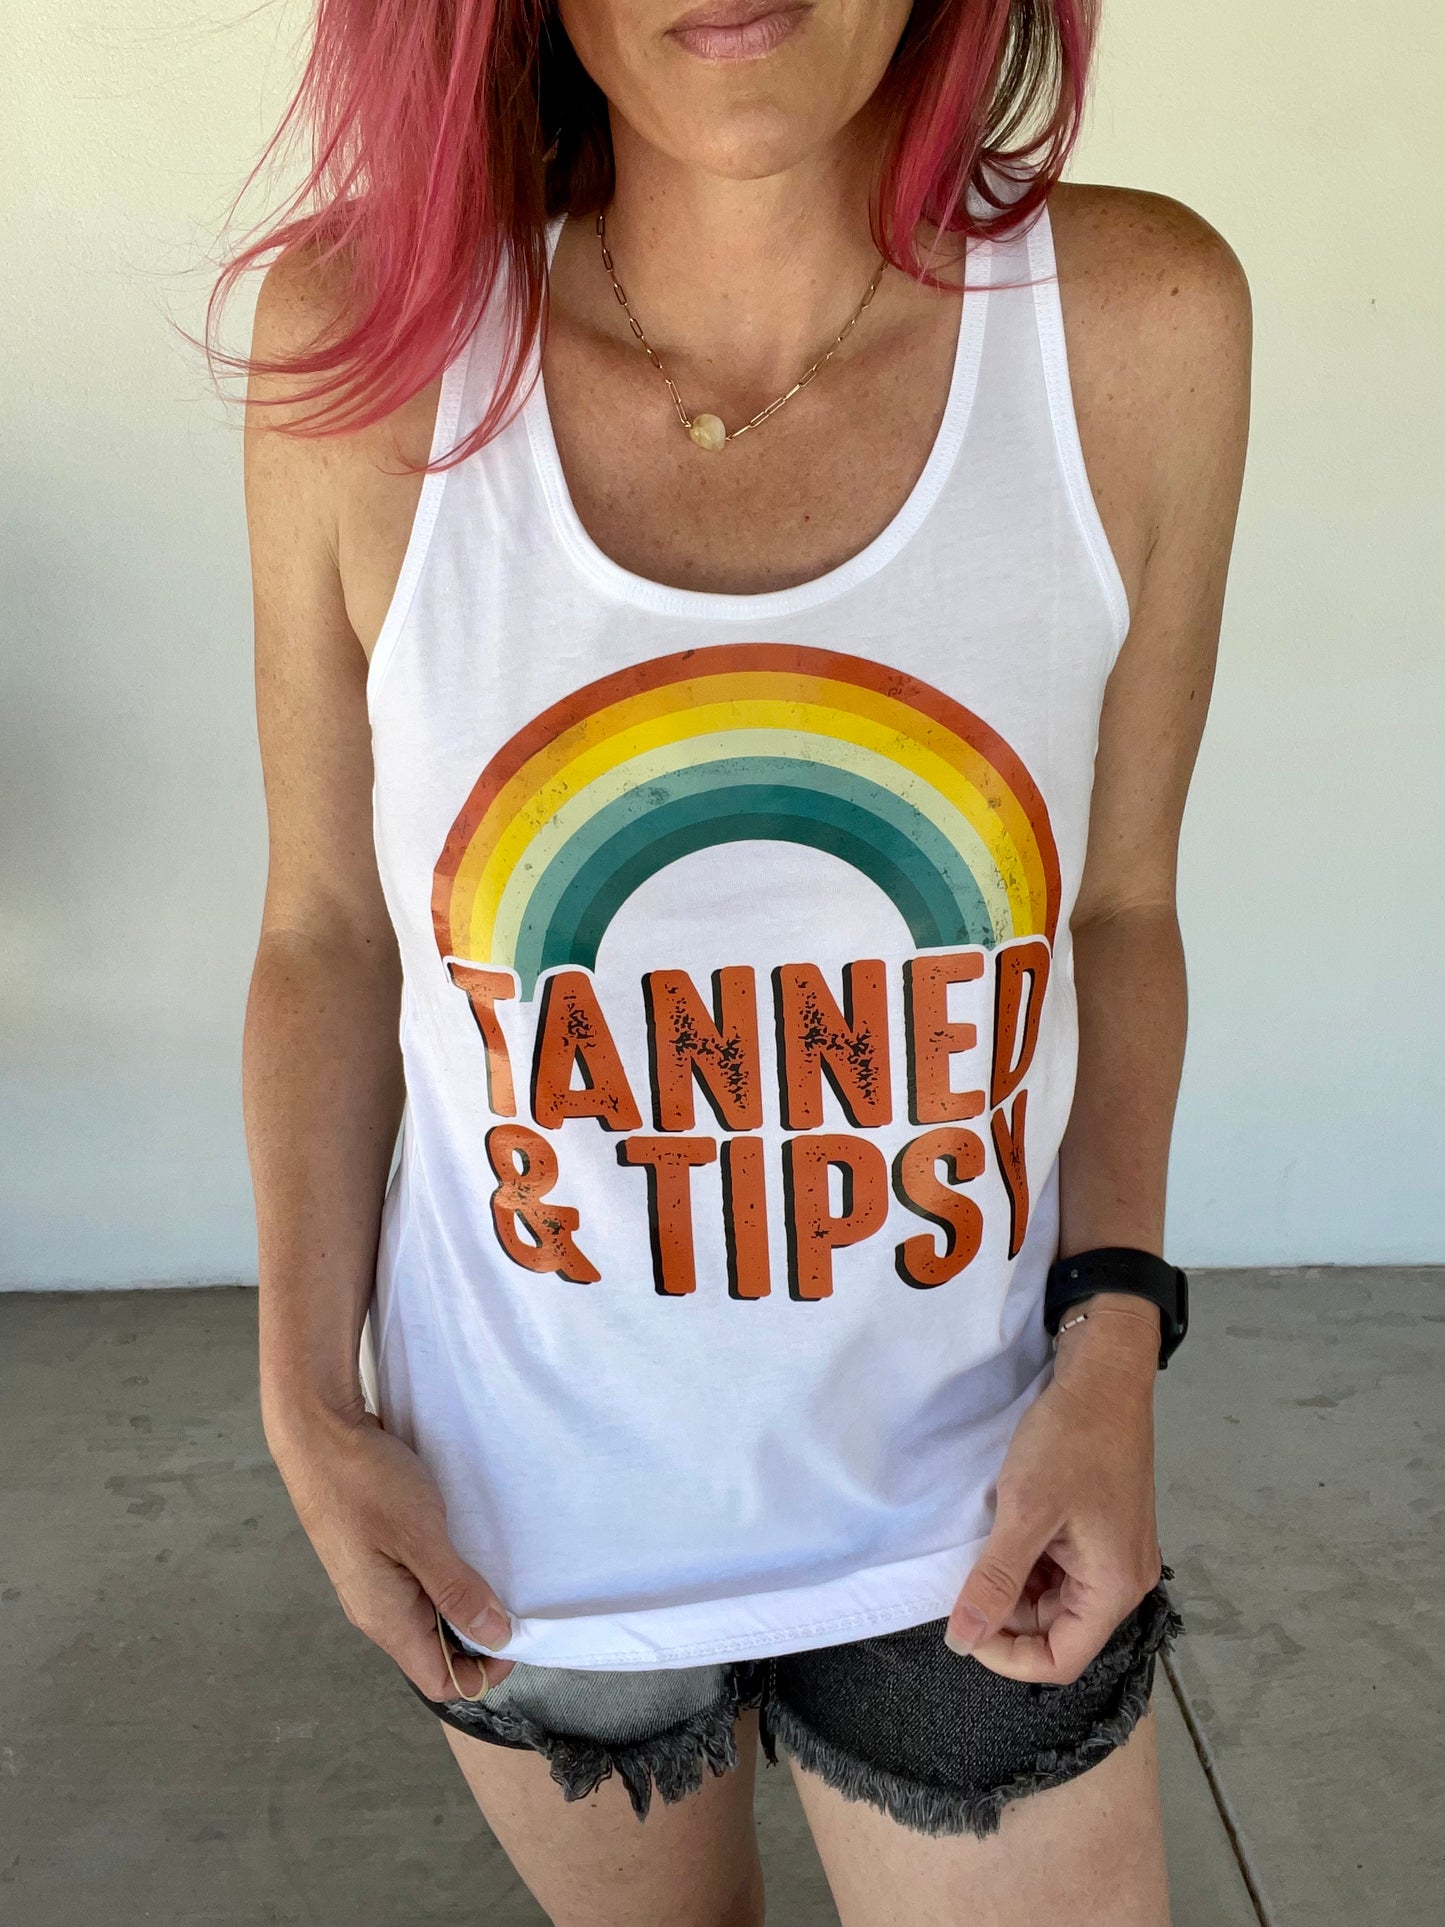 The Tanned Tank